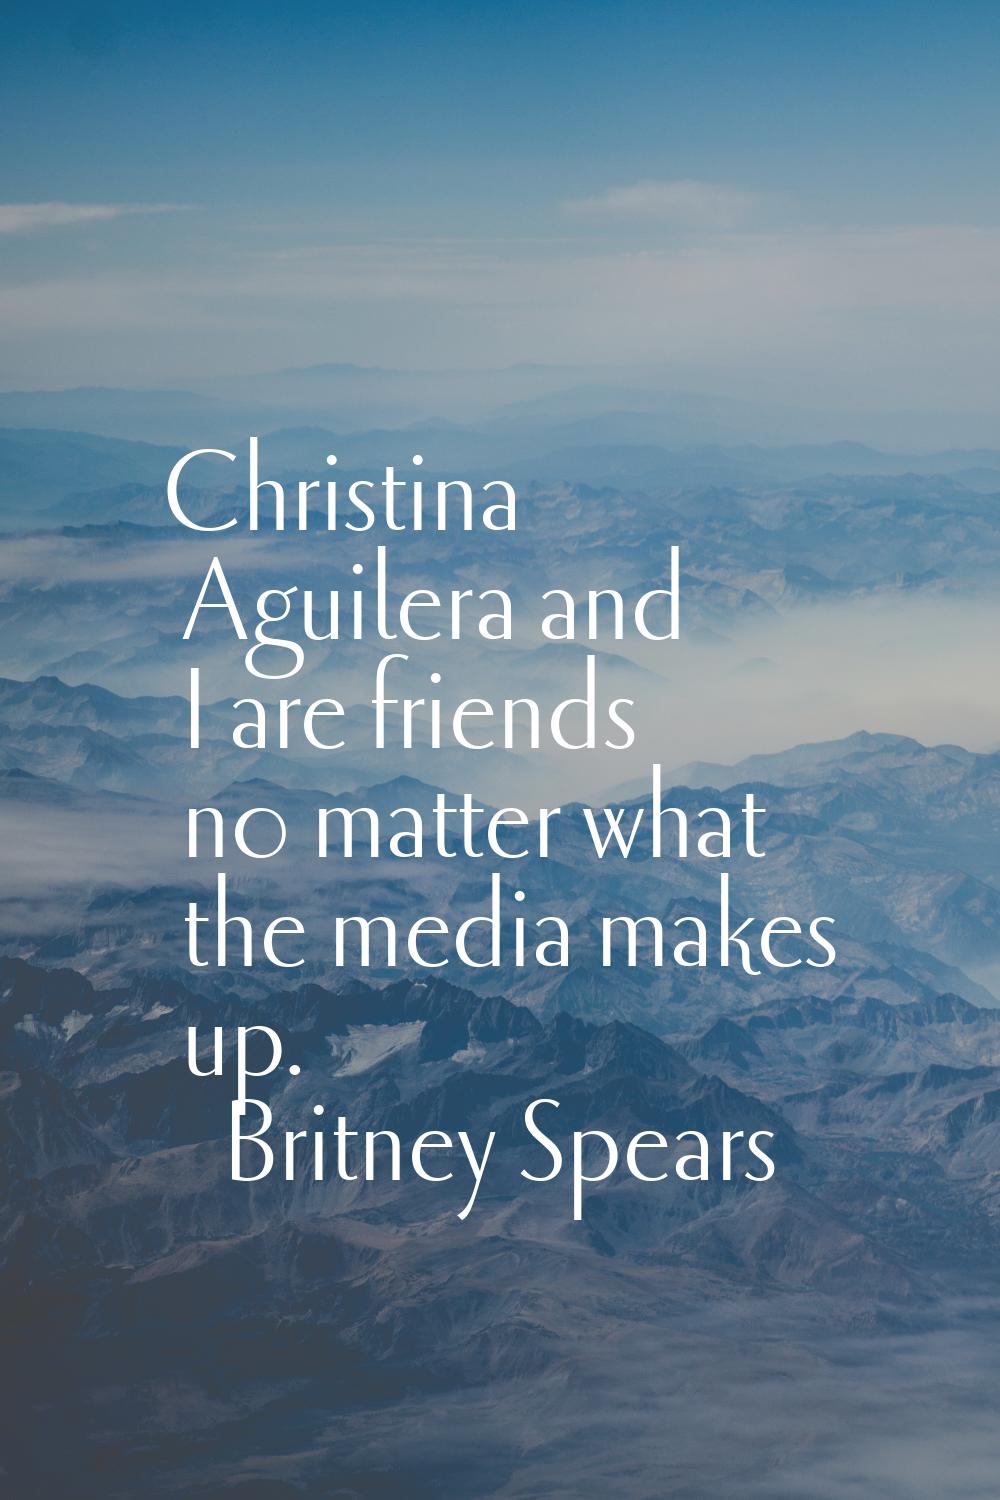 Christina Aguilera and I are friends no matter what the media makes up.